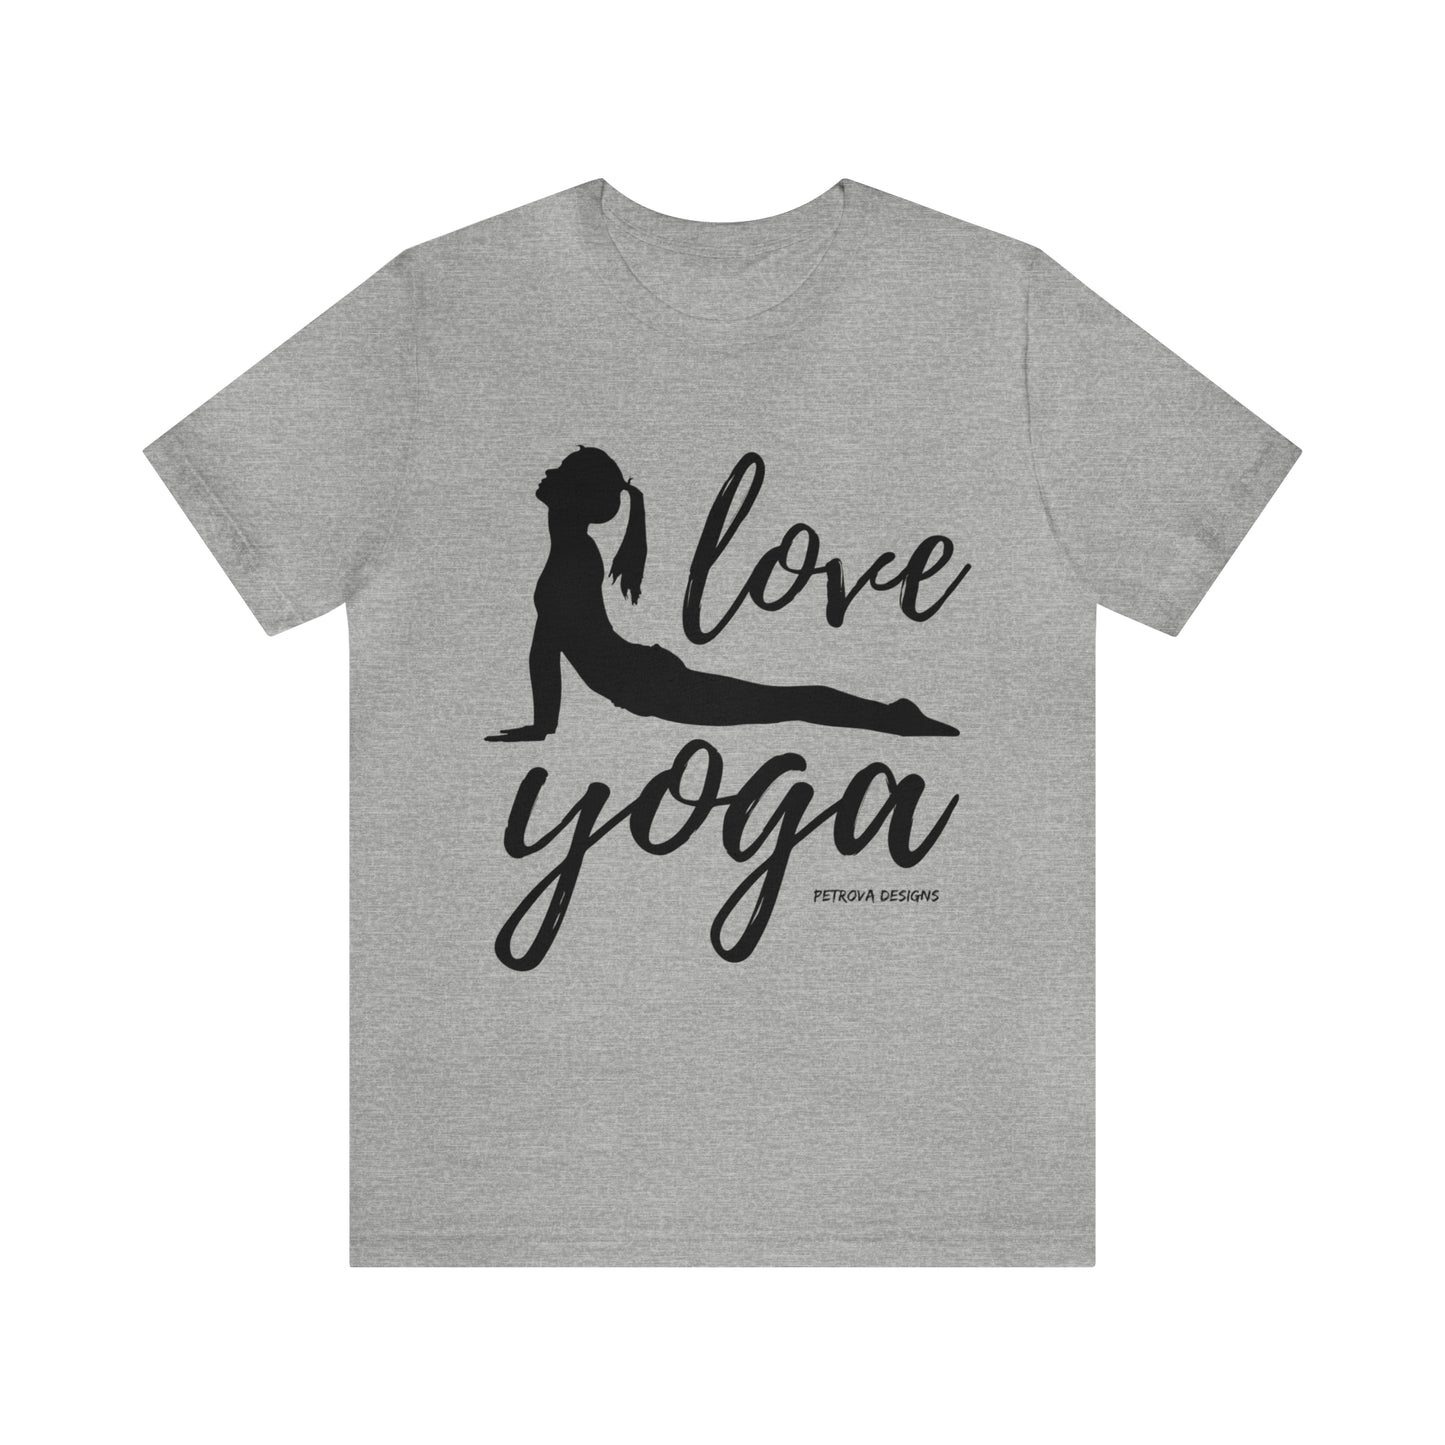 Athletic Heather T-Shirt Tshirt Design Gift for Friend and Family Short Sleeved Shirt Yoga Petrova Designs